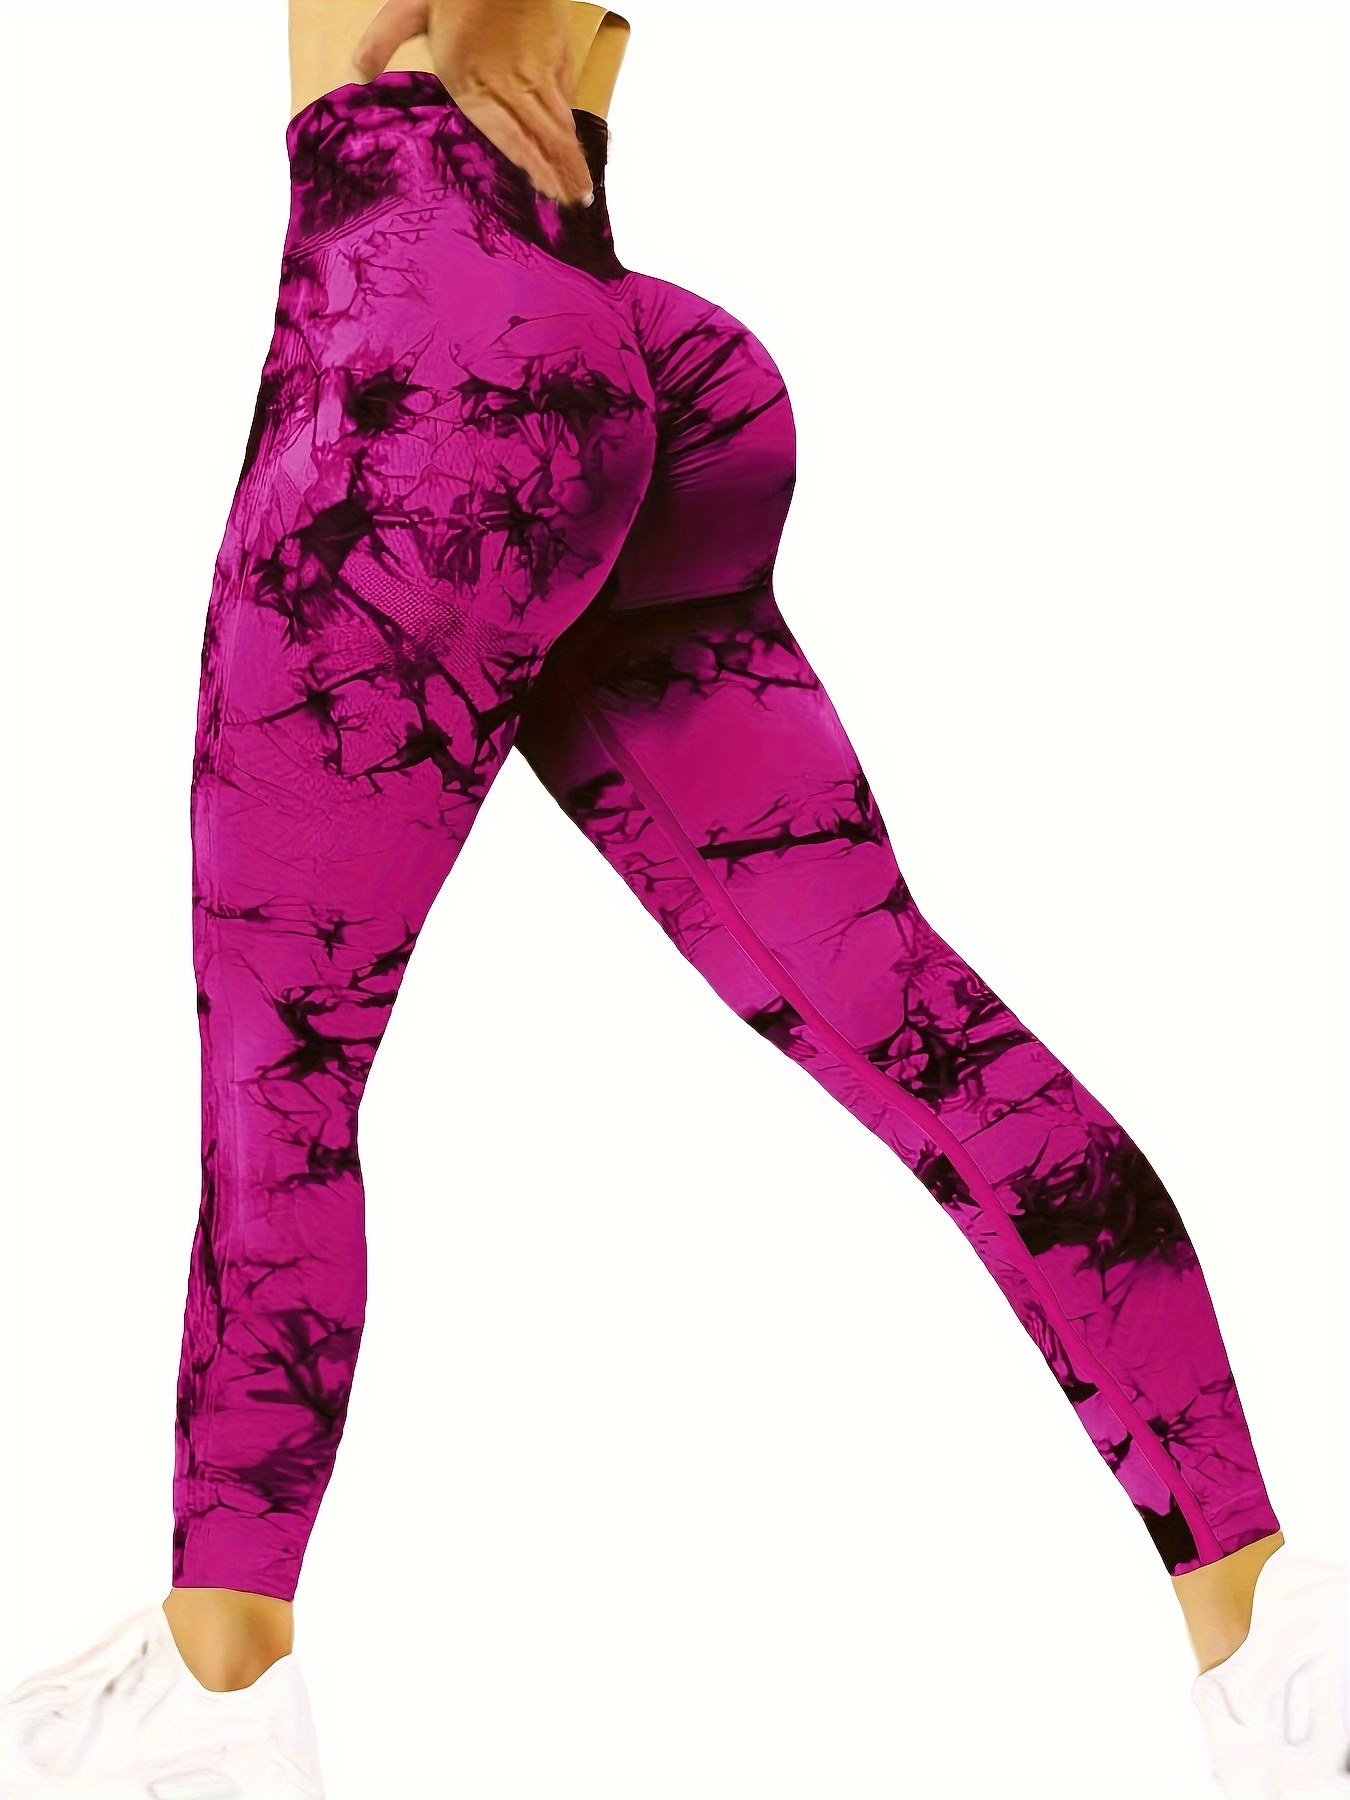 Tie Dye Stretchy Seamless Yoga Sports Pants, Breathable High Waist  Butt-lifting Fitness Gym Leggings, Women's Activewear